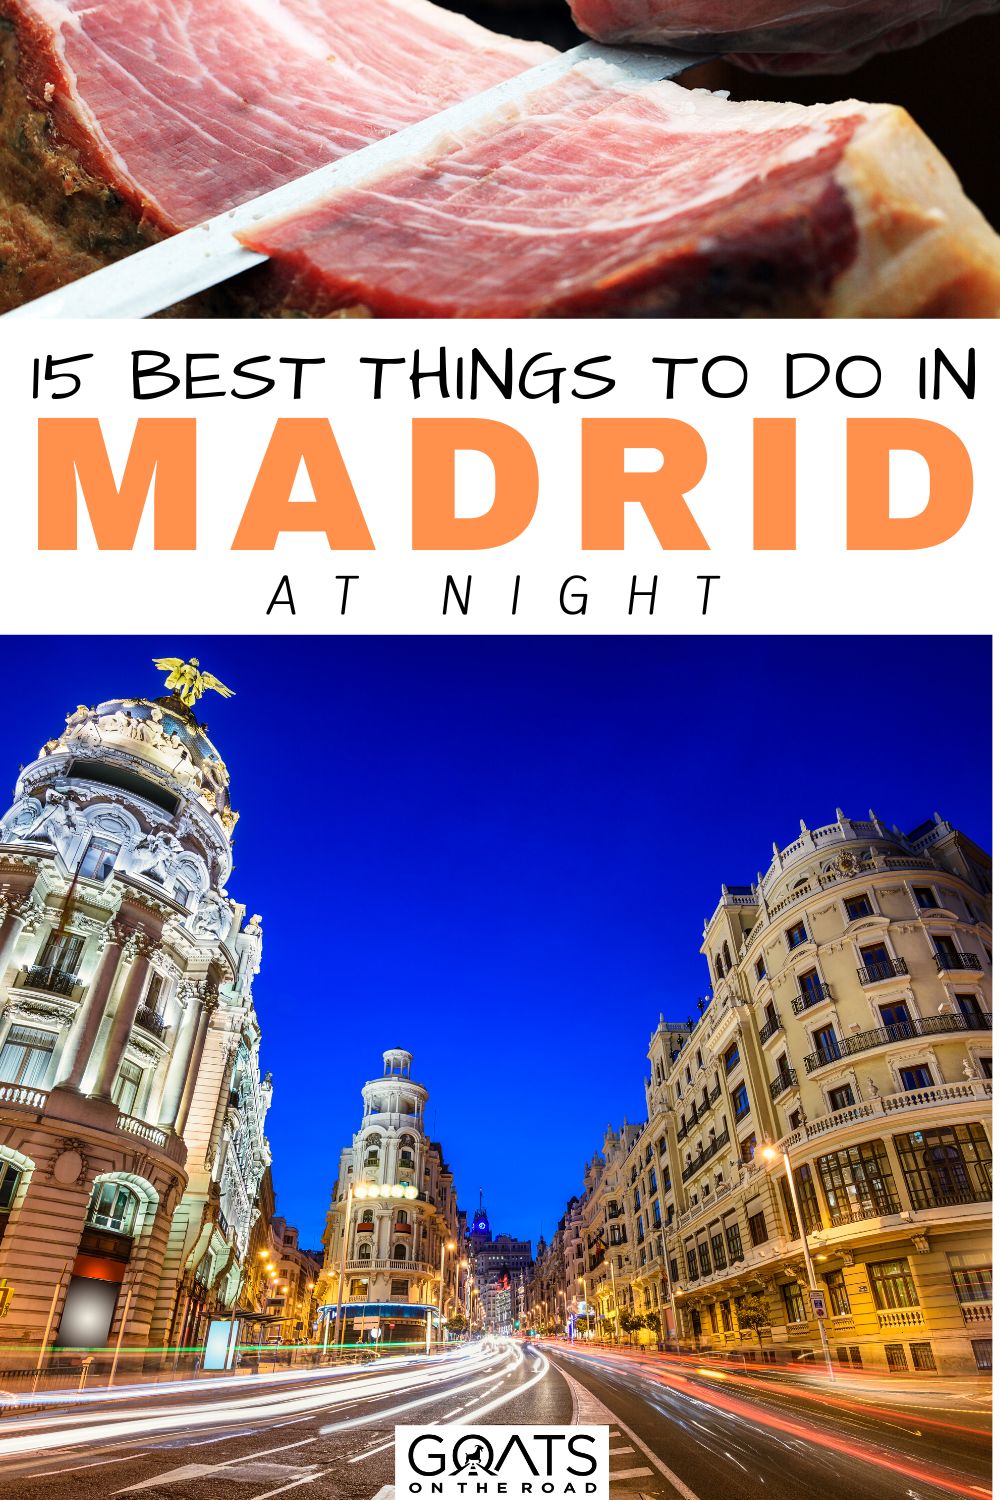 “15 Best Things To Do in Madrid At Night